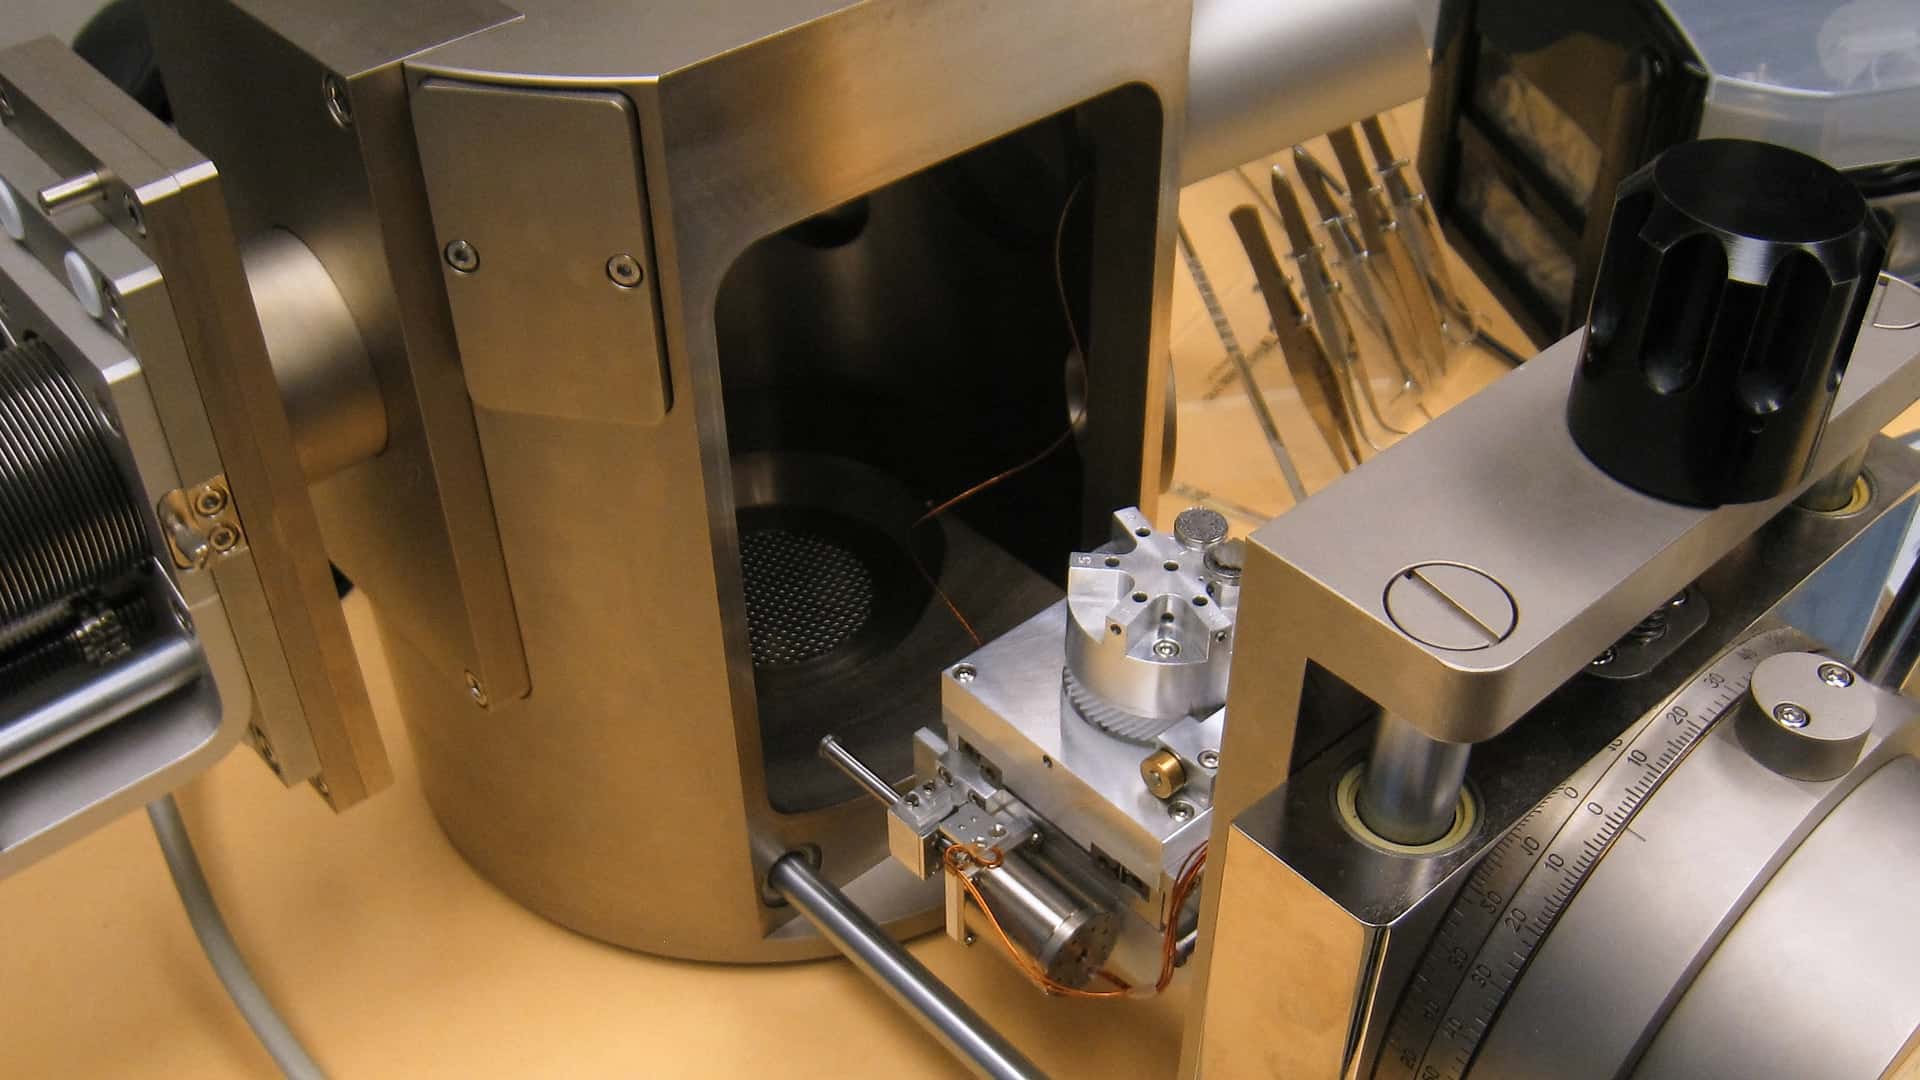 loading specimens into the vacuum chamber of a scanning electron microscope